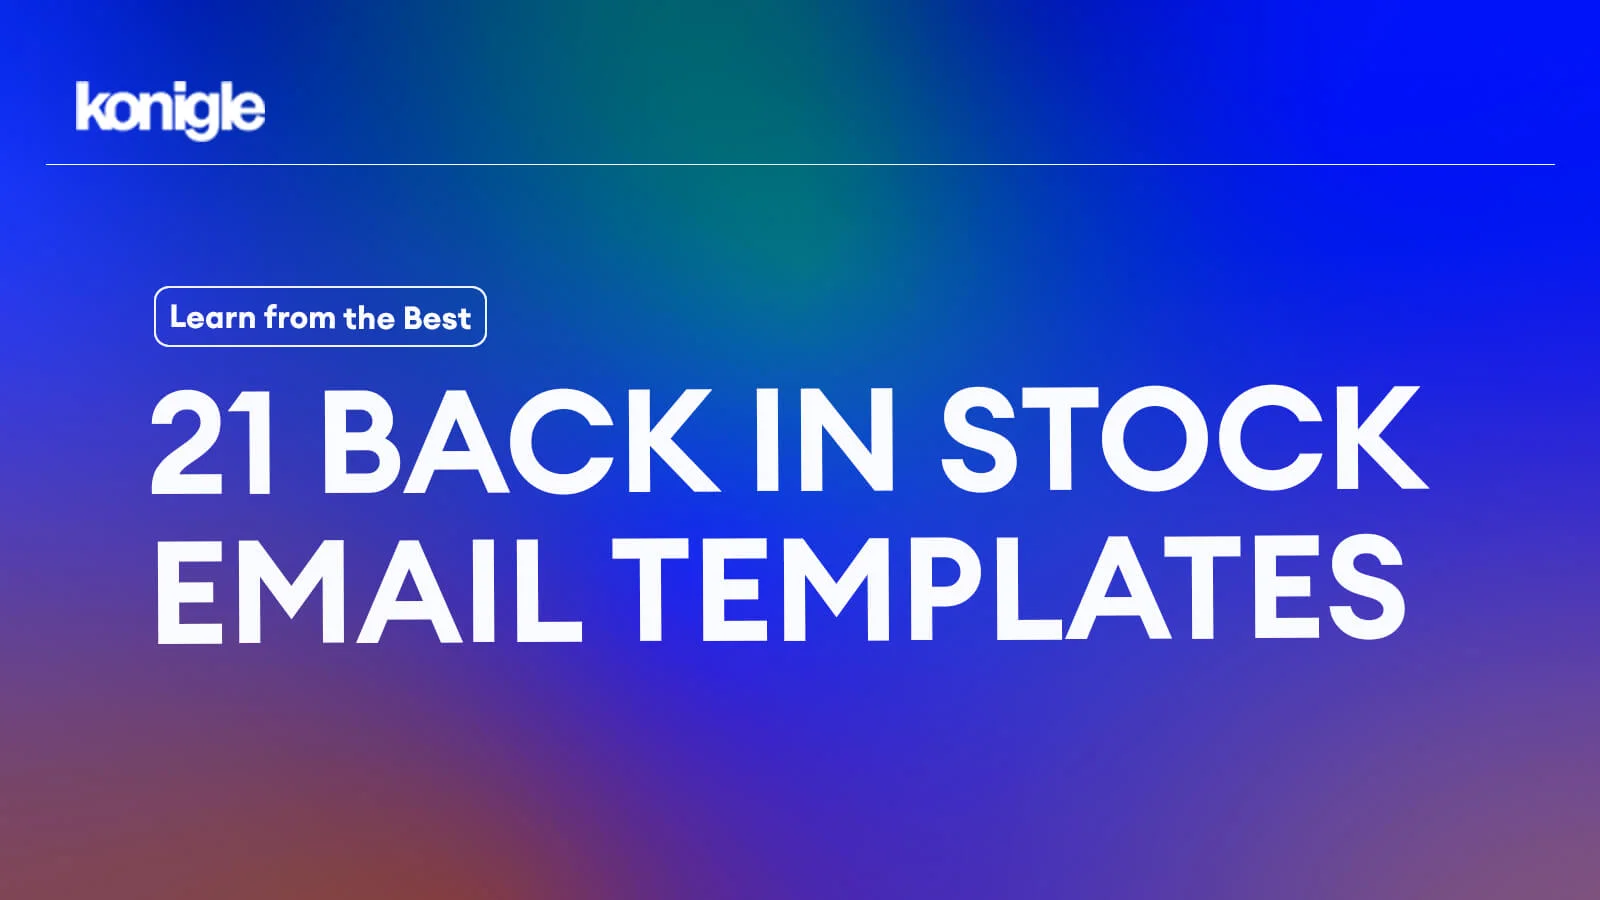 21 Back in Stock Email Templates